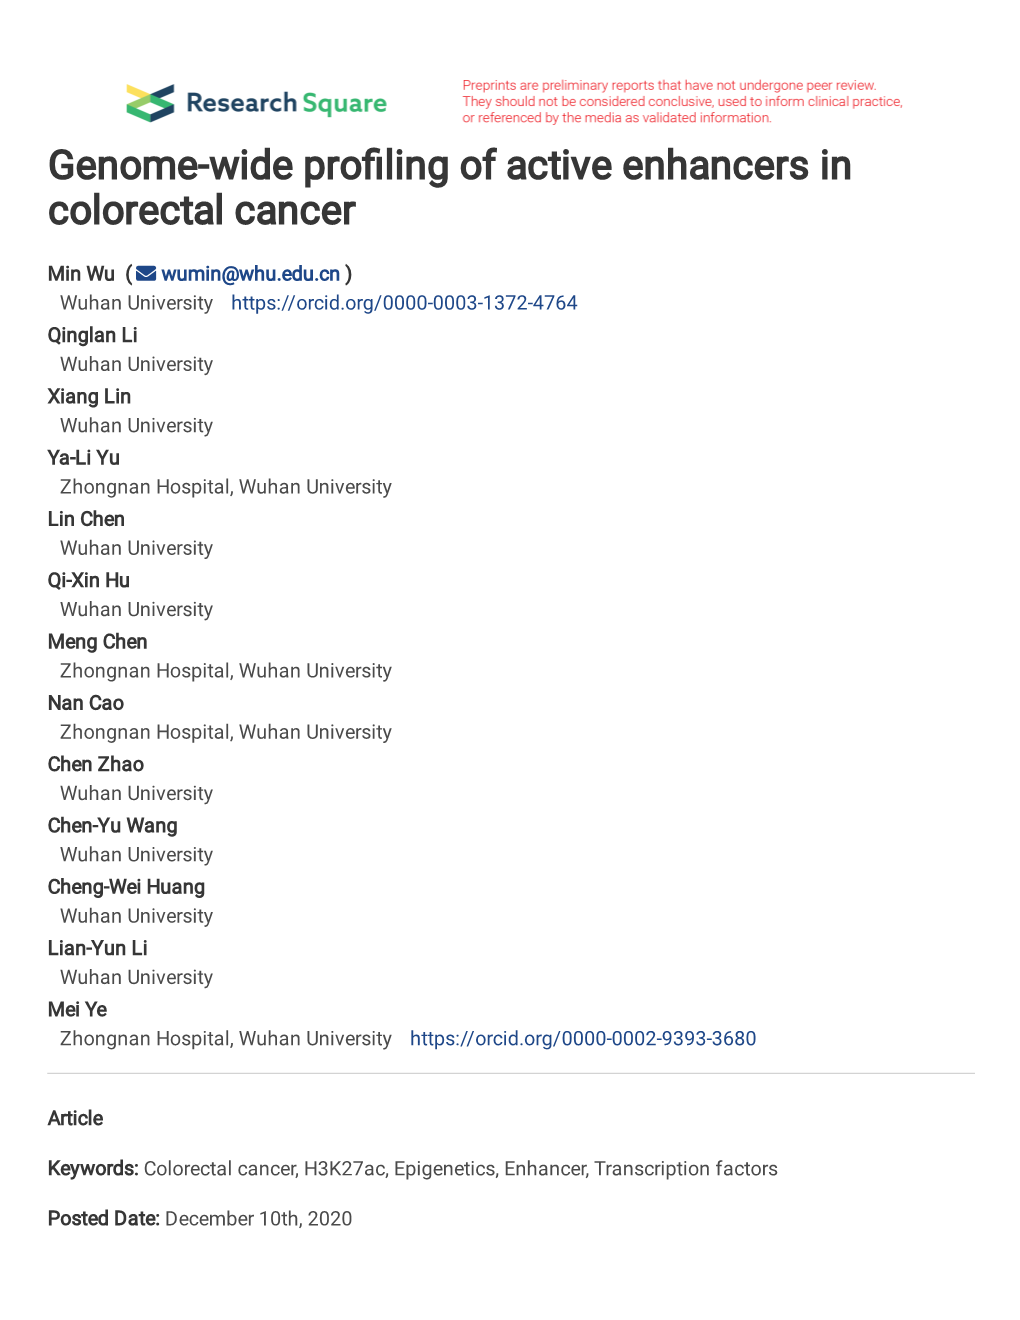 Genome-Wide Profiling of Active Enhancers in Colorectal Cancer